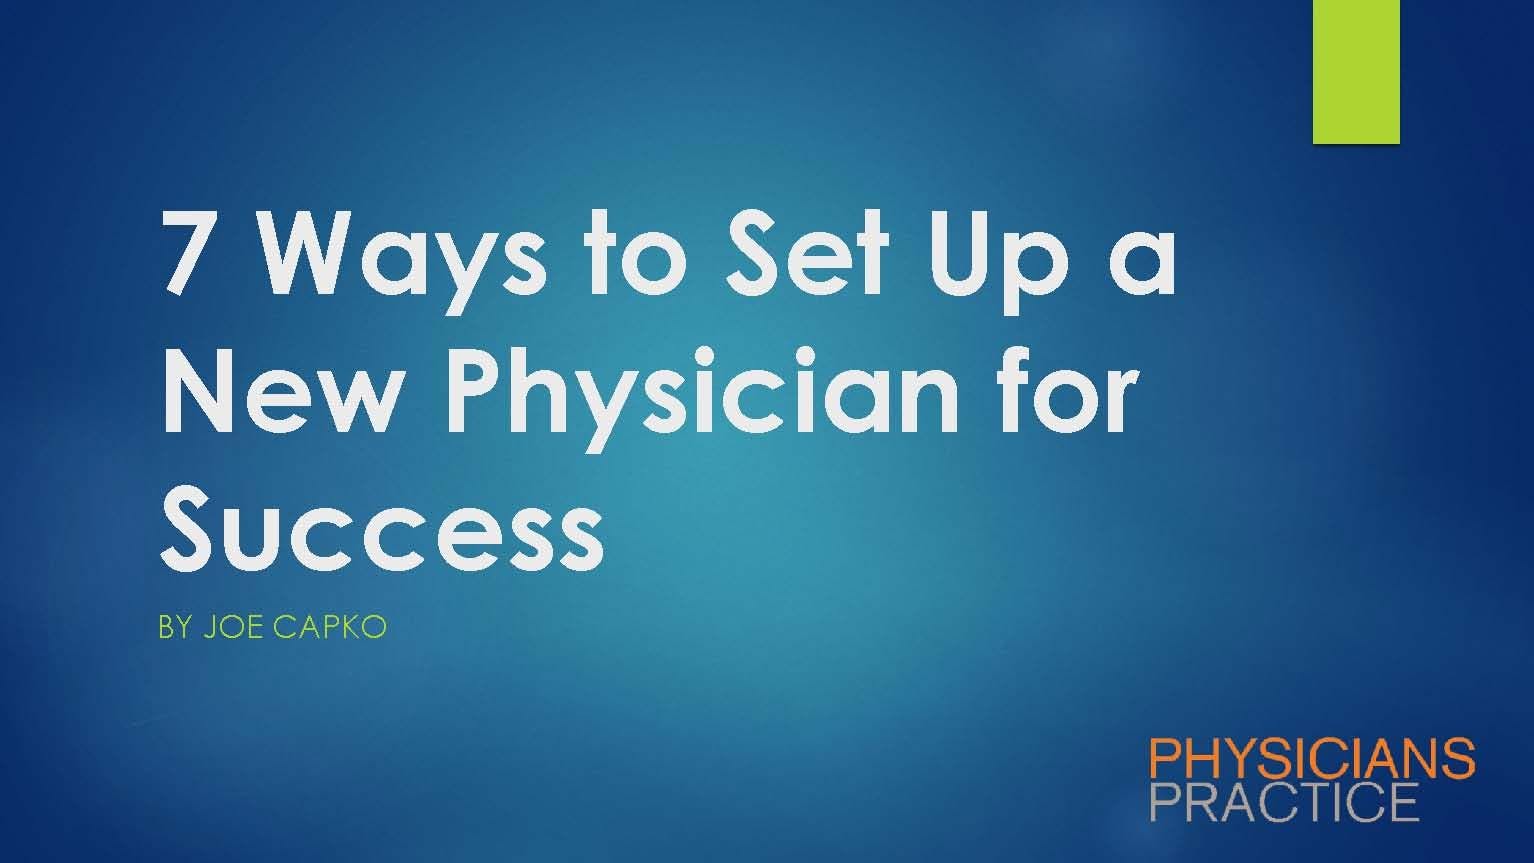 7 Ways to Set Up a New Physician for Success 